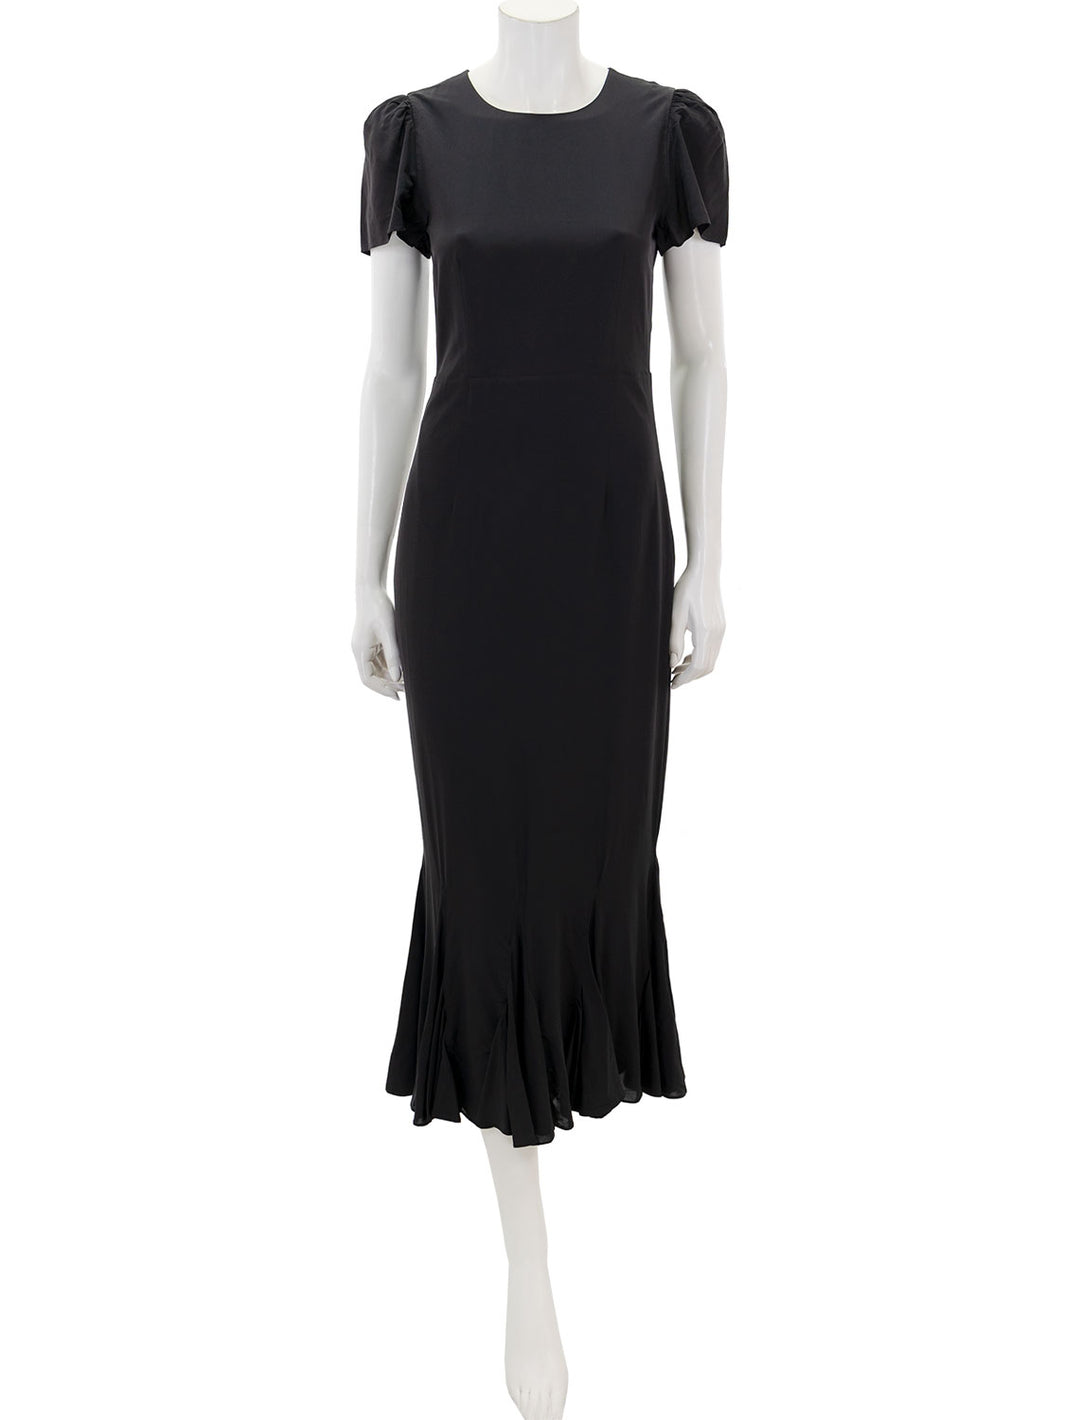 Front view of Rhode's lulani dress in black.